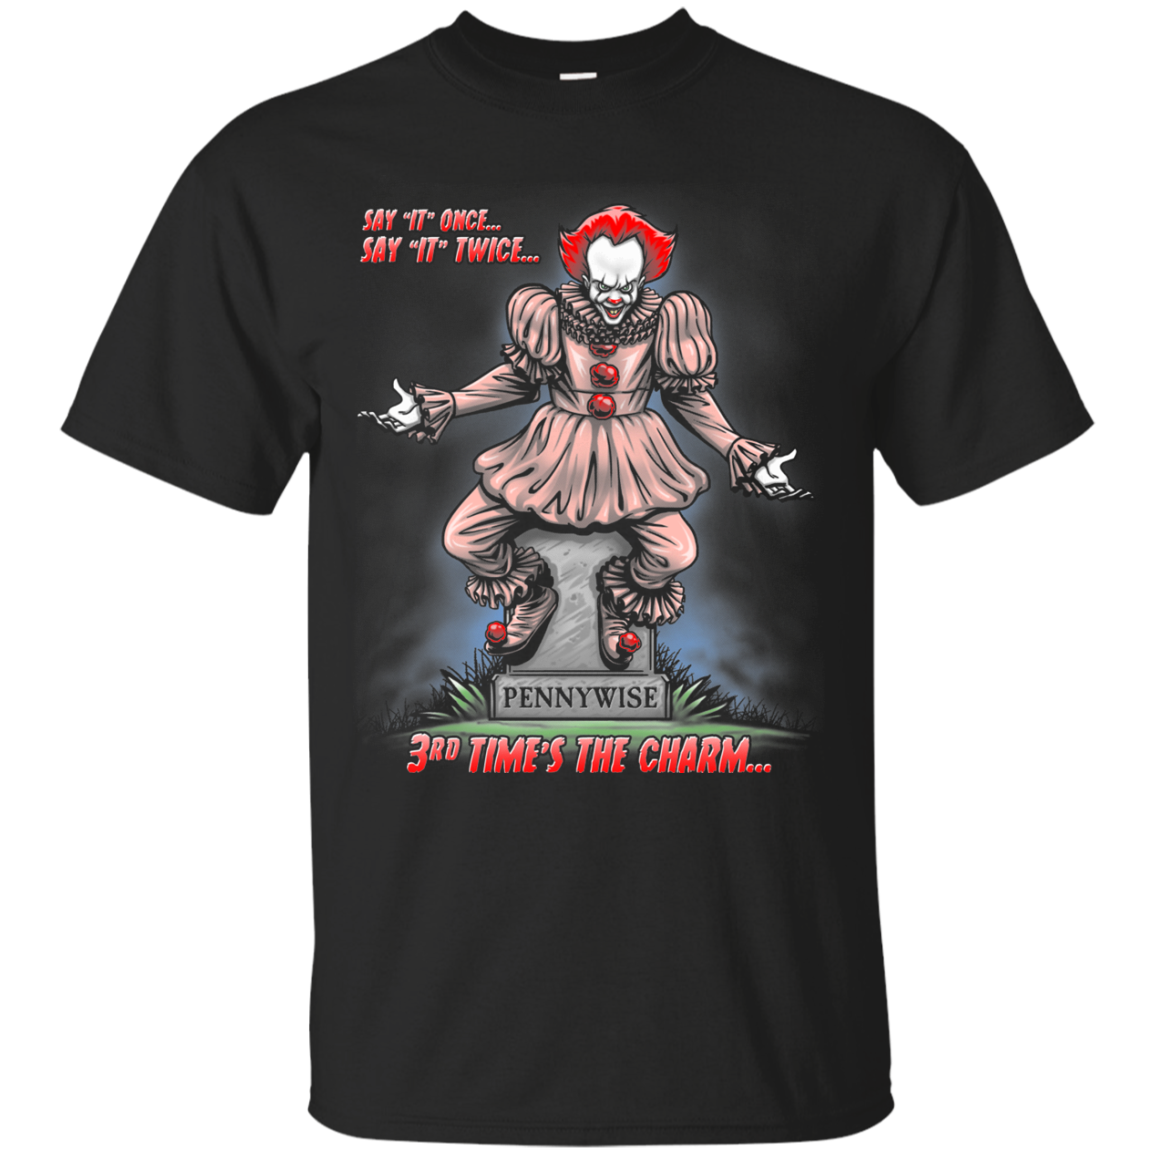 Pennywise the Dancing Clown T-Shirt